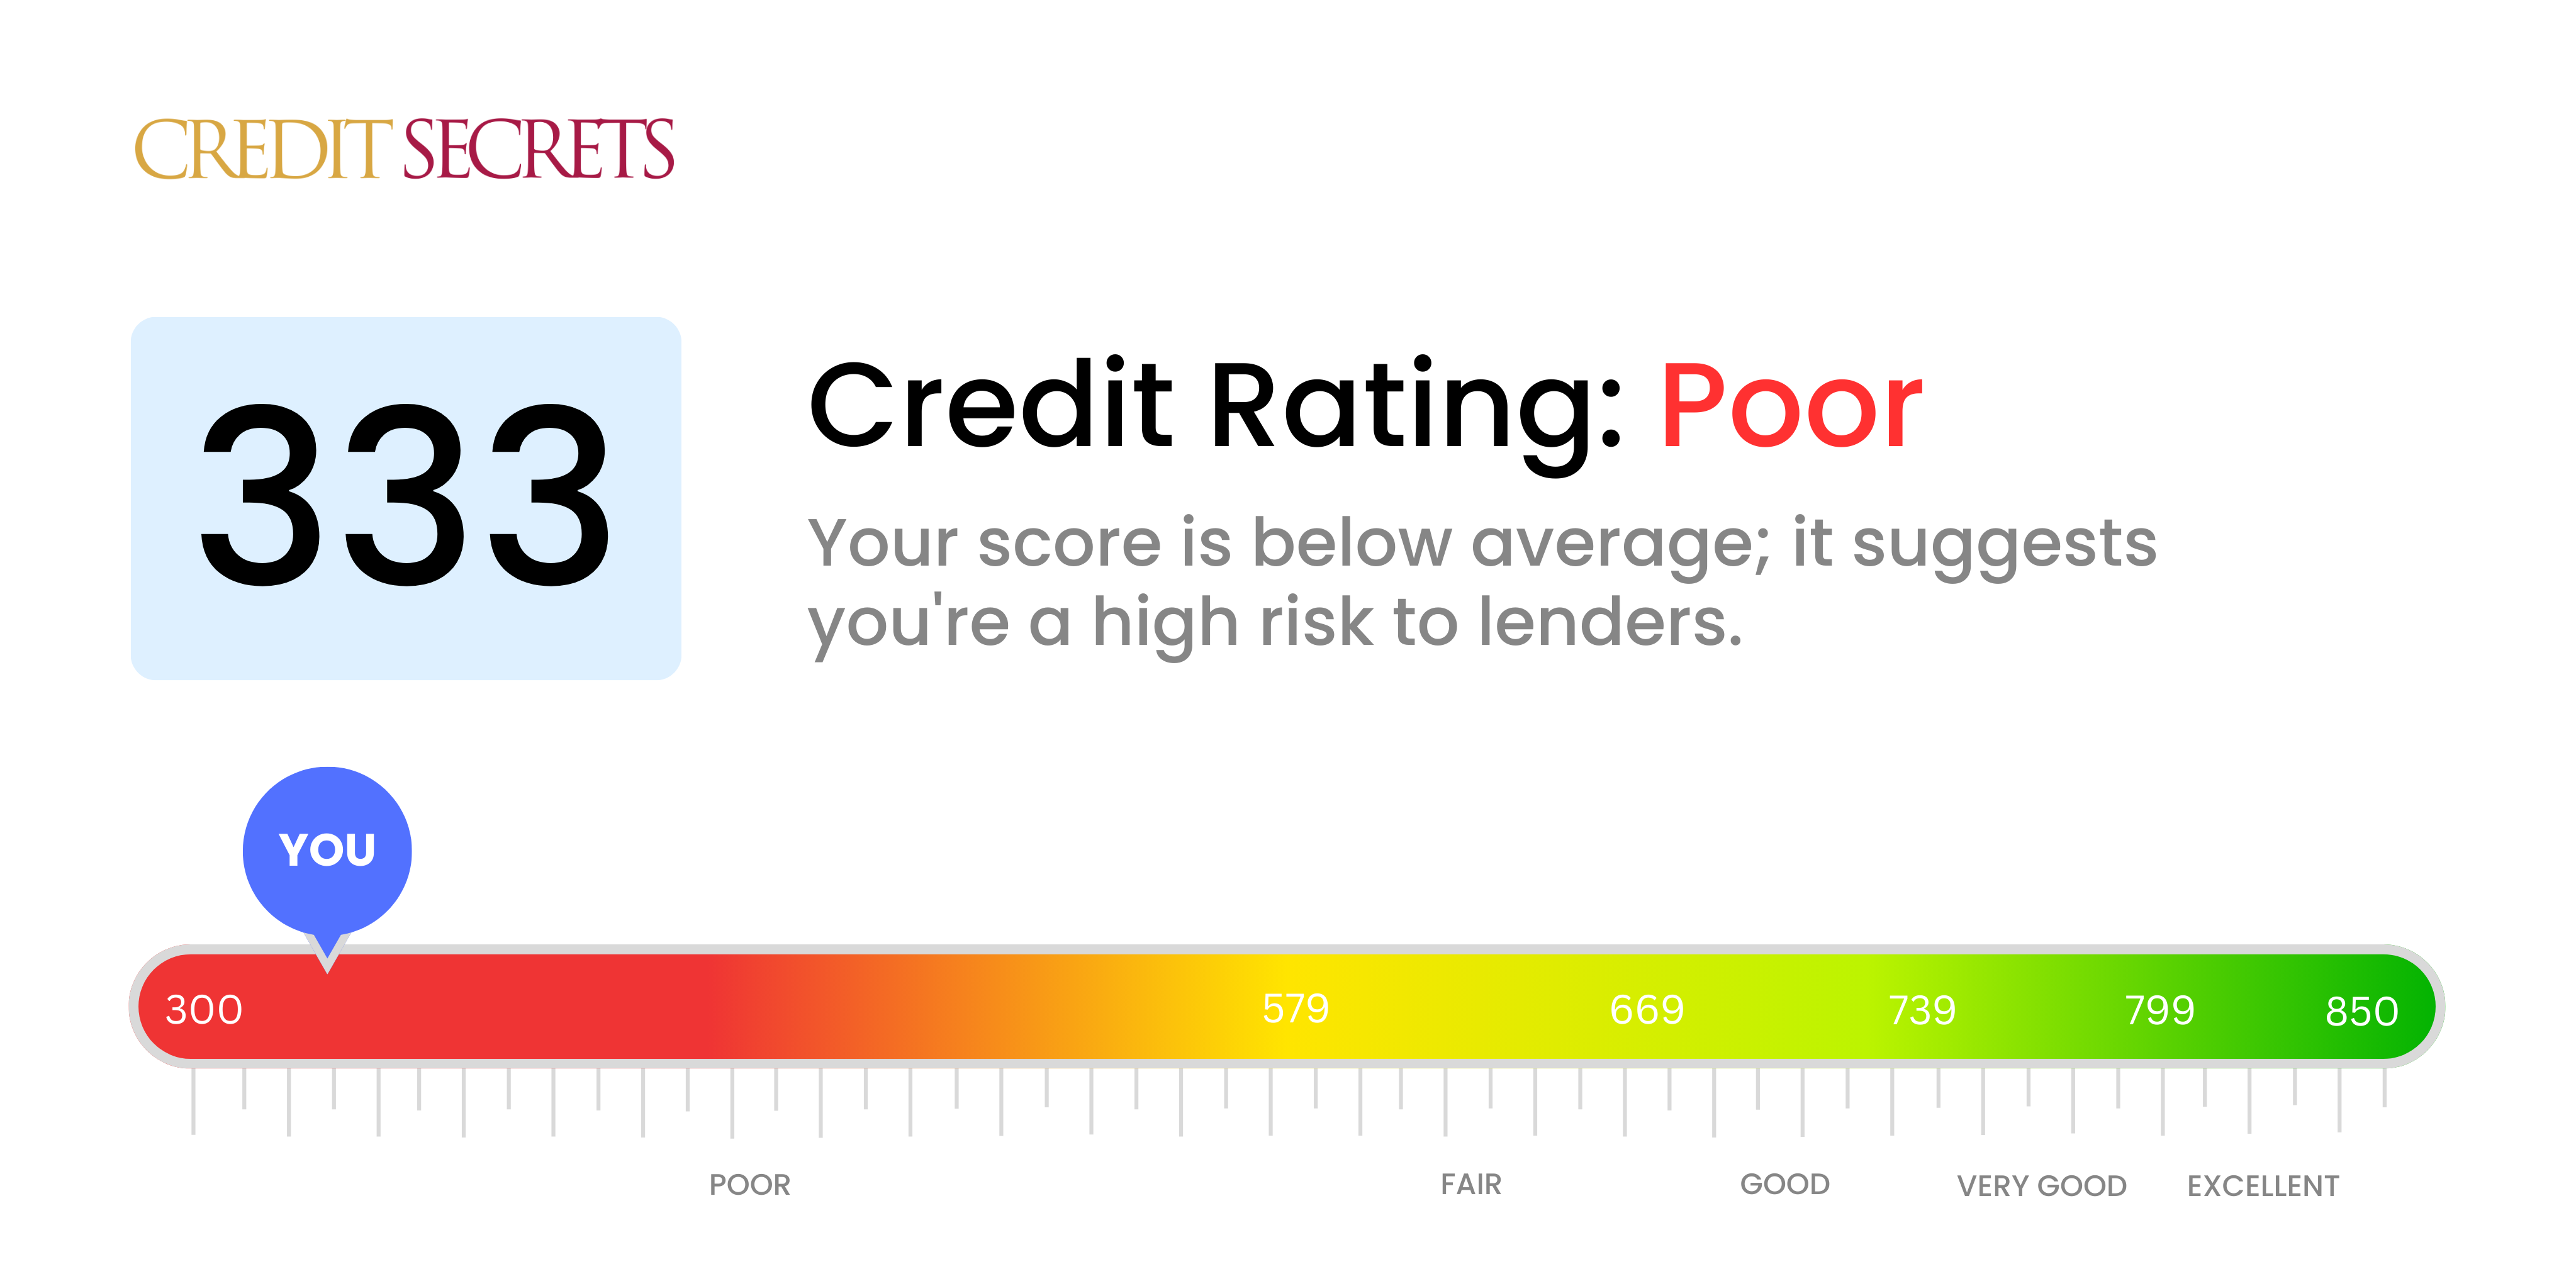 Is 333 a good credit score?